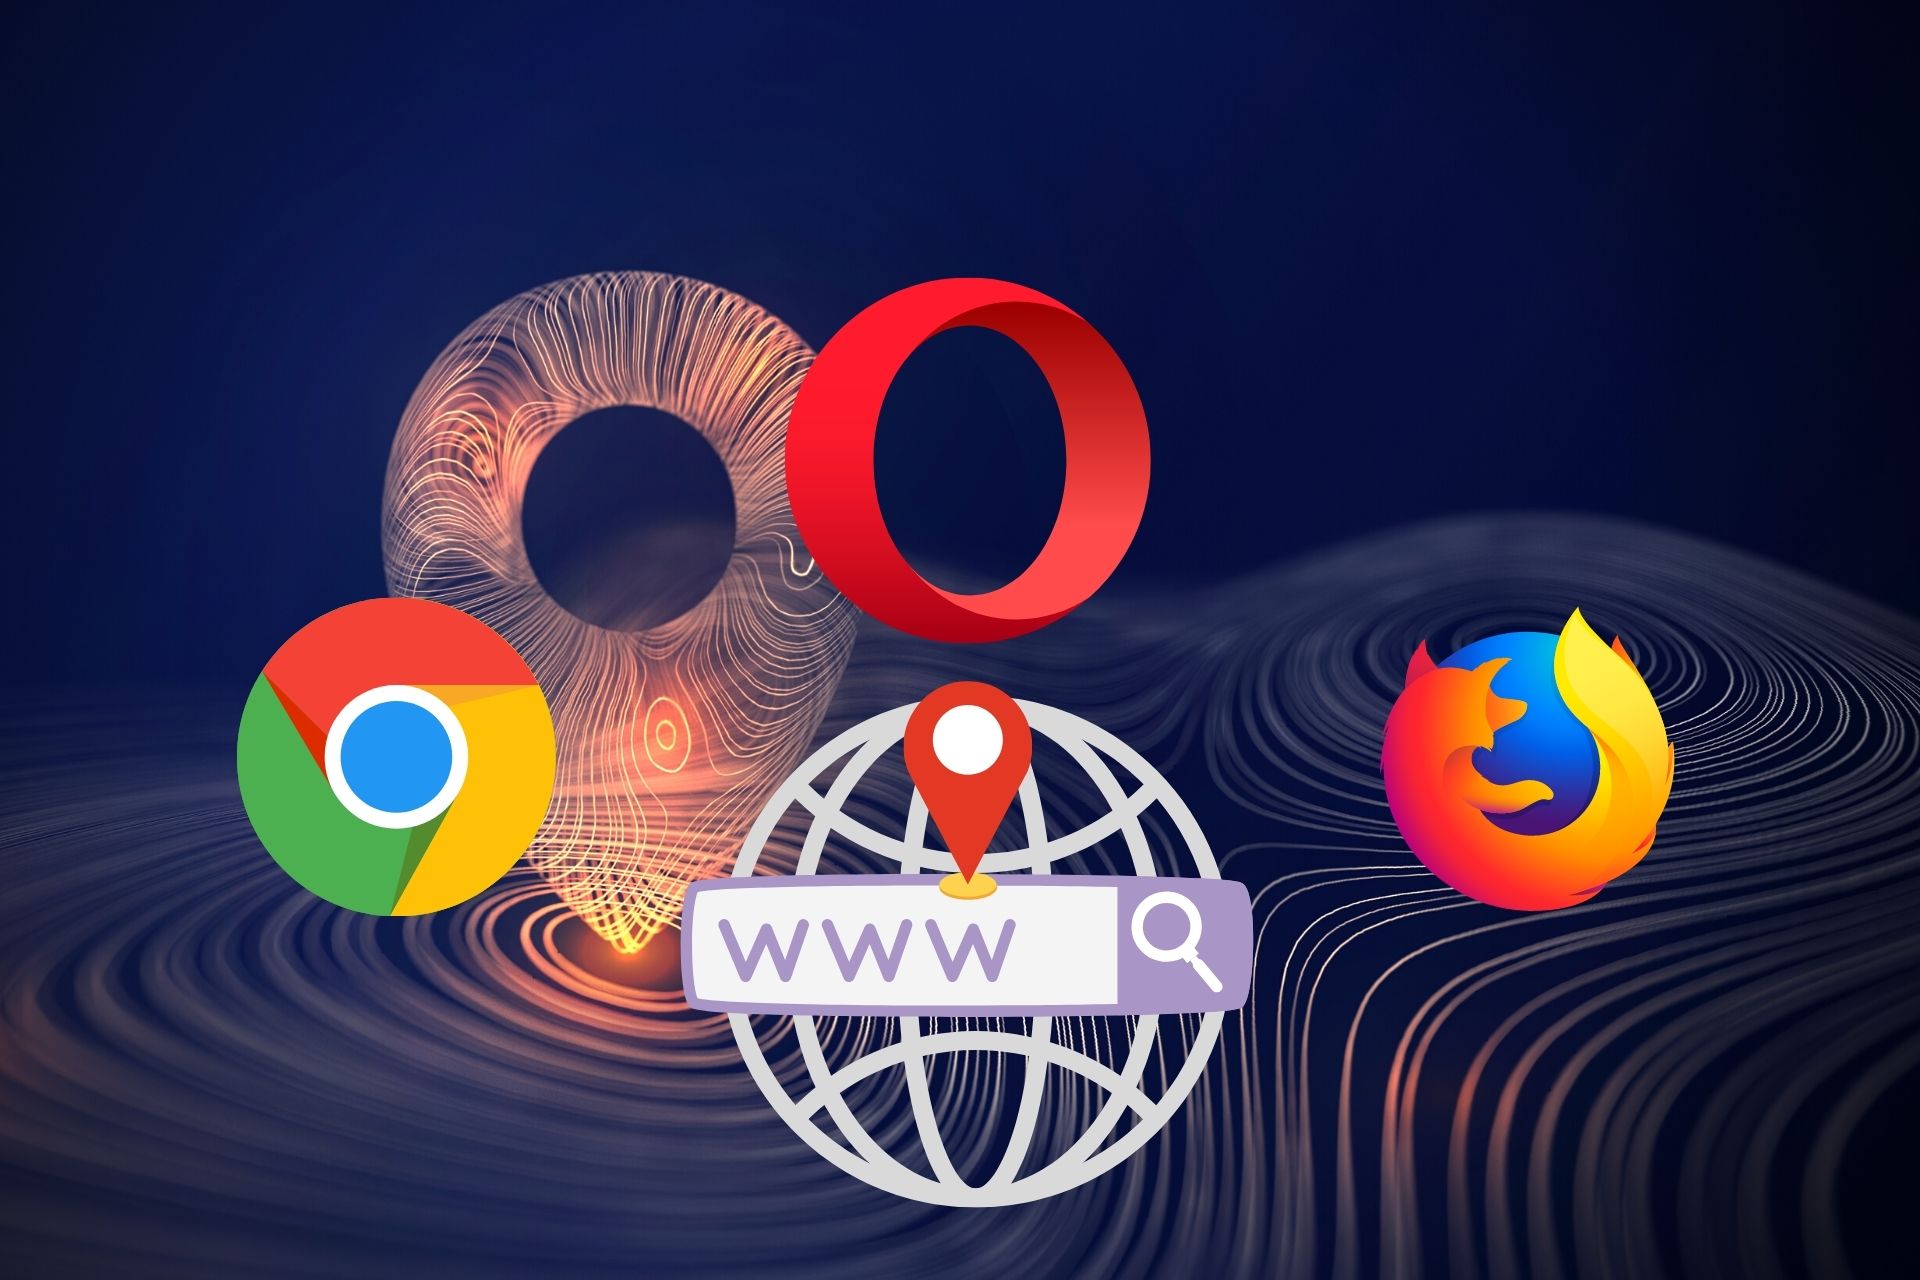 How to Change the Location in Your Browser